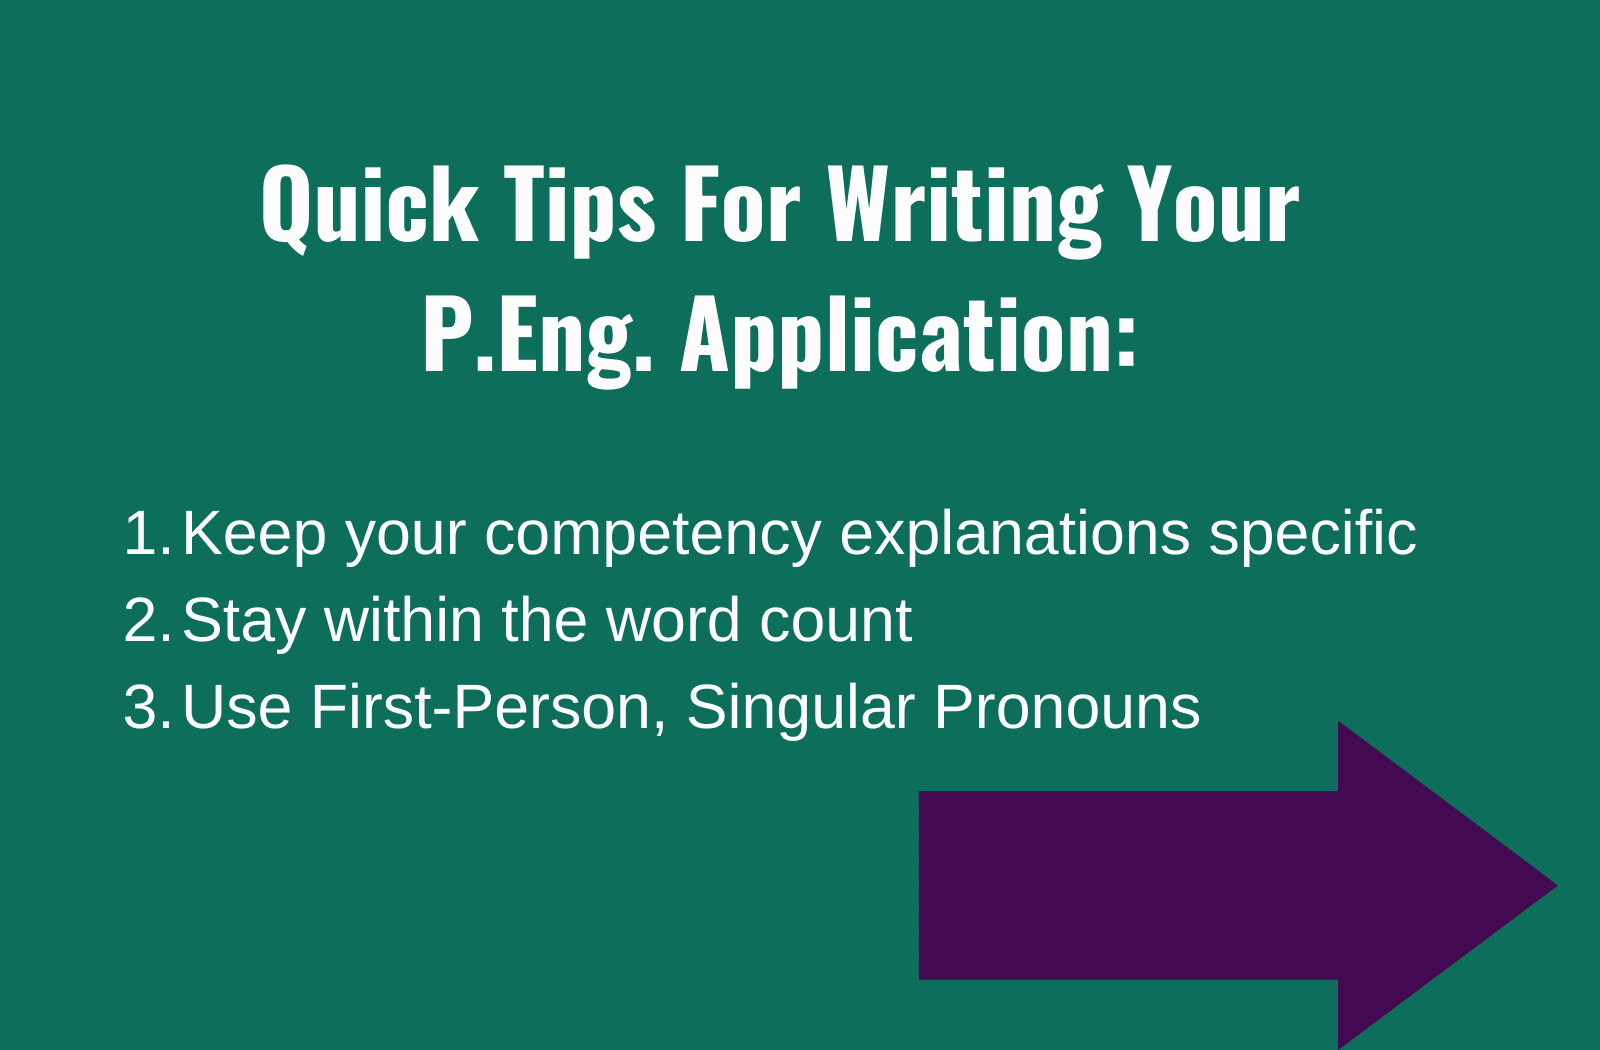 Quick tips on writing your application